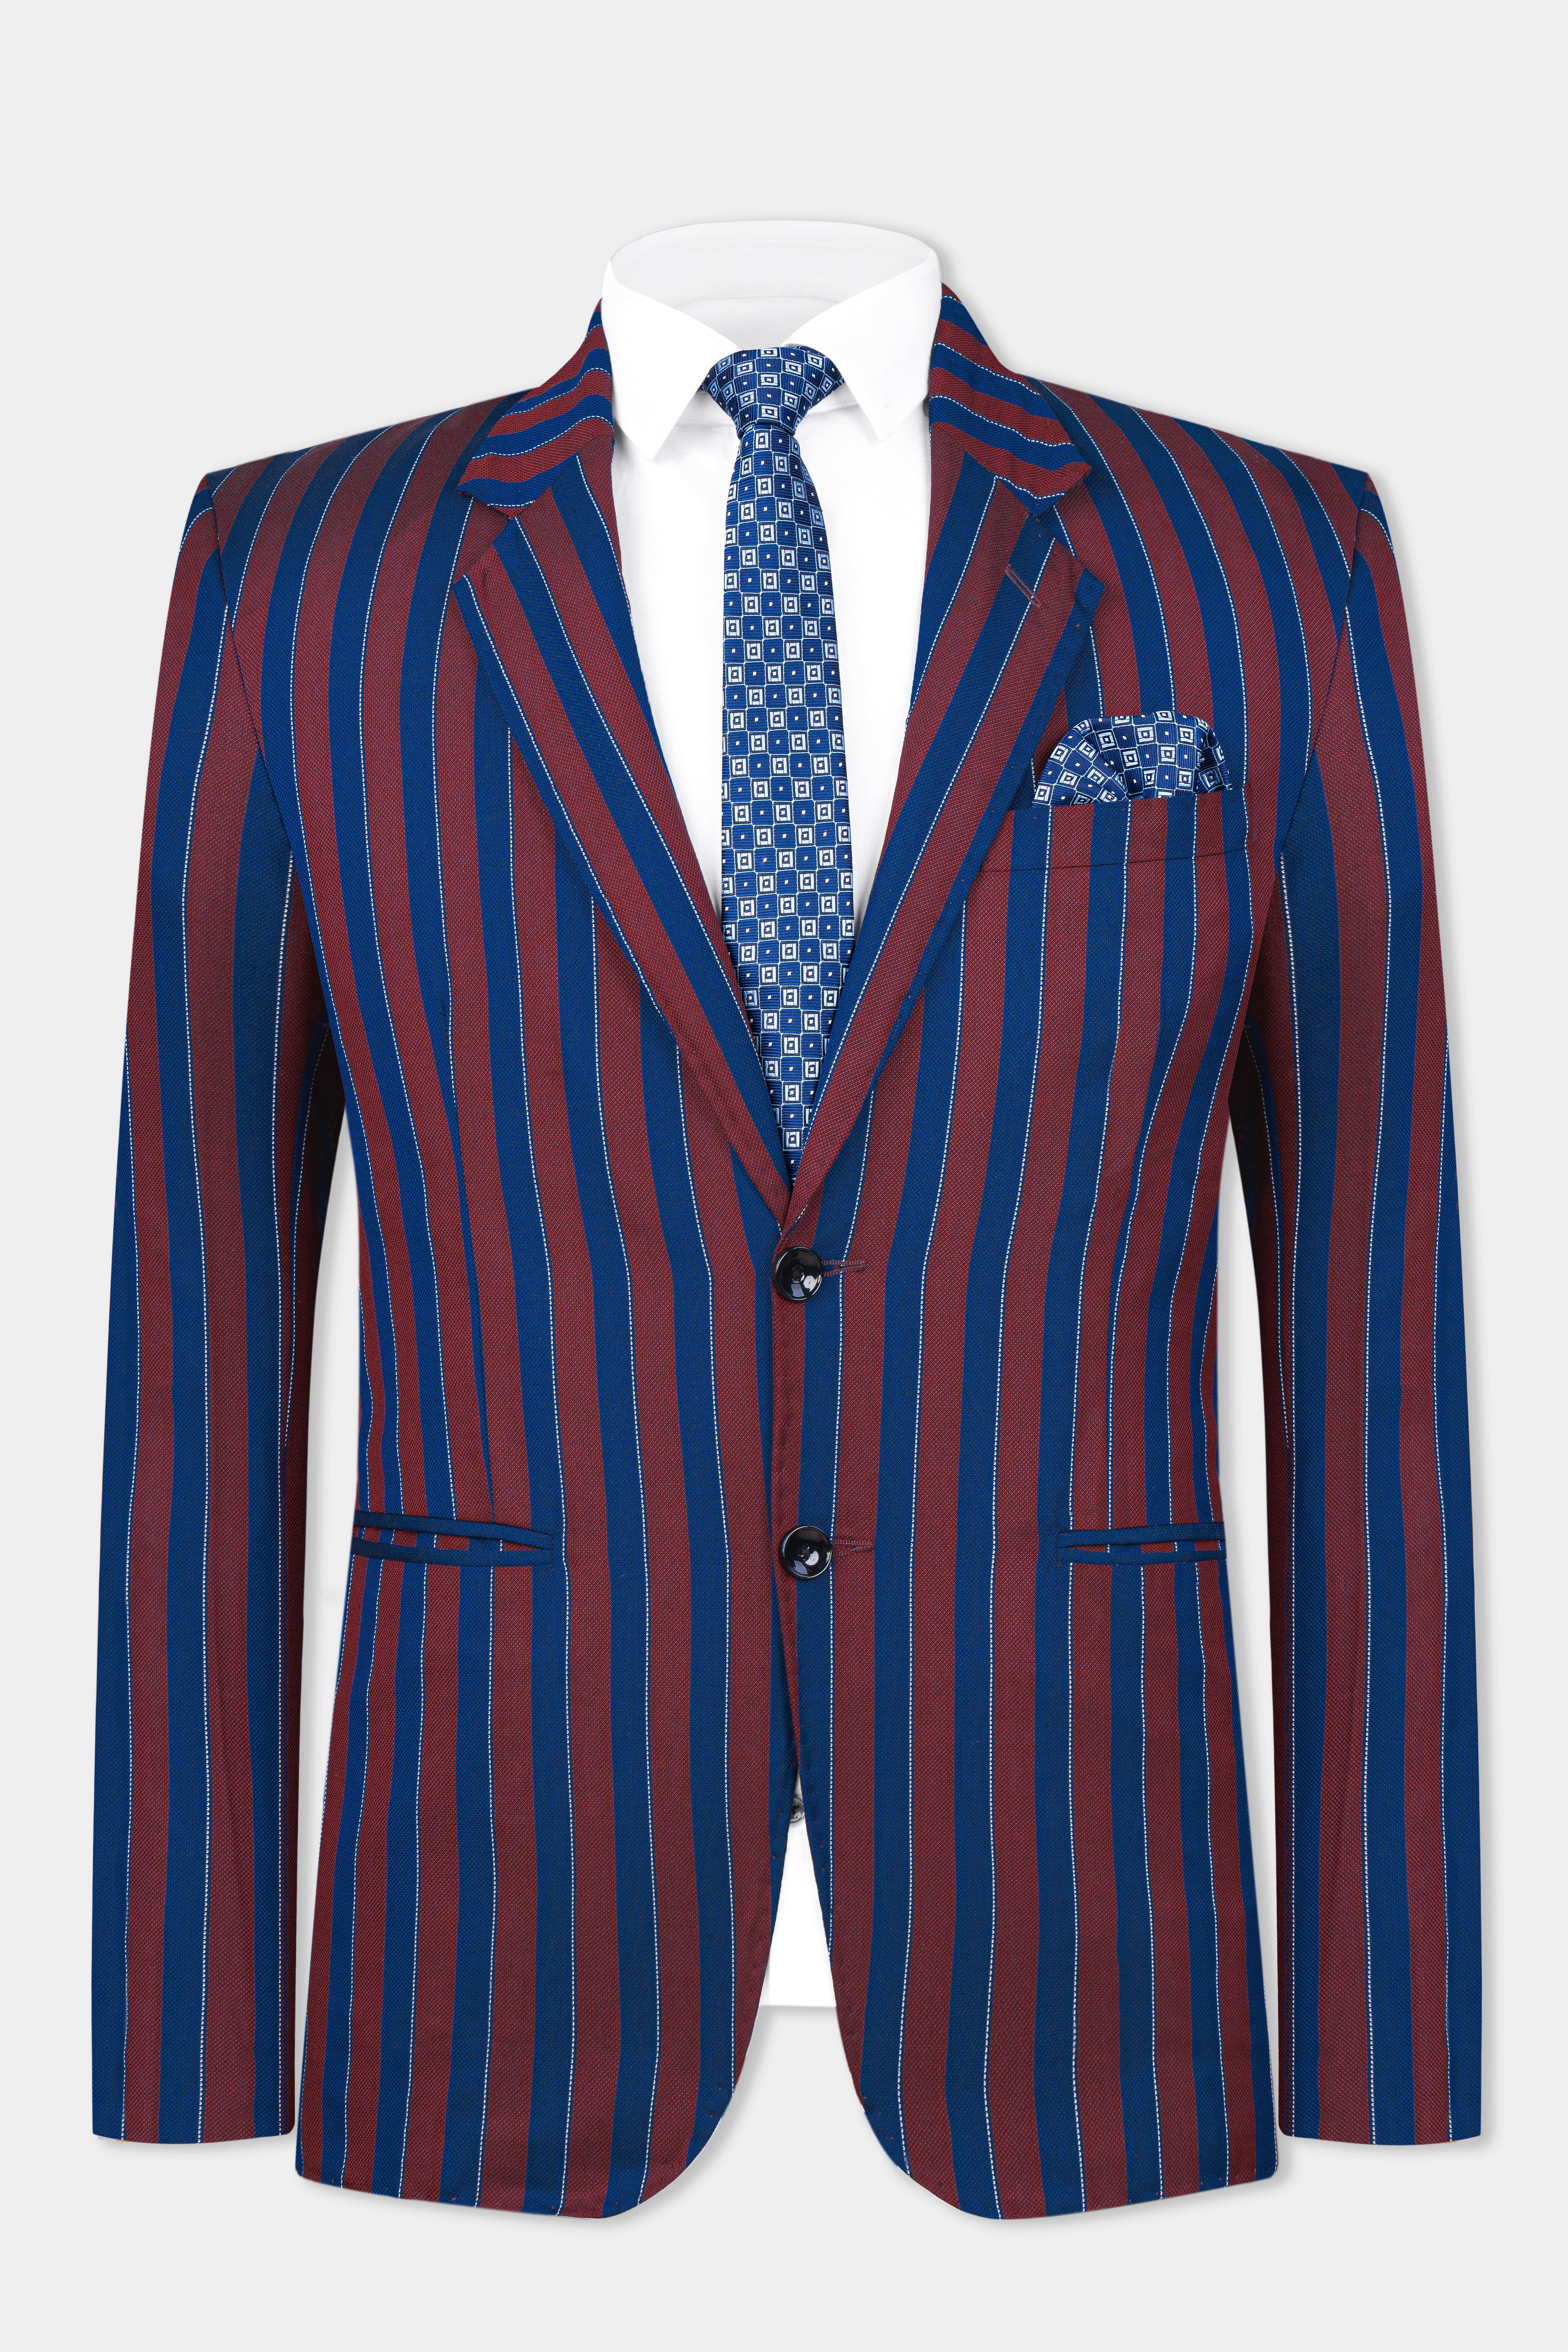 Top more than 86 navy blue striped suit latest